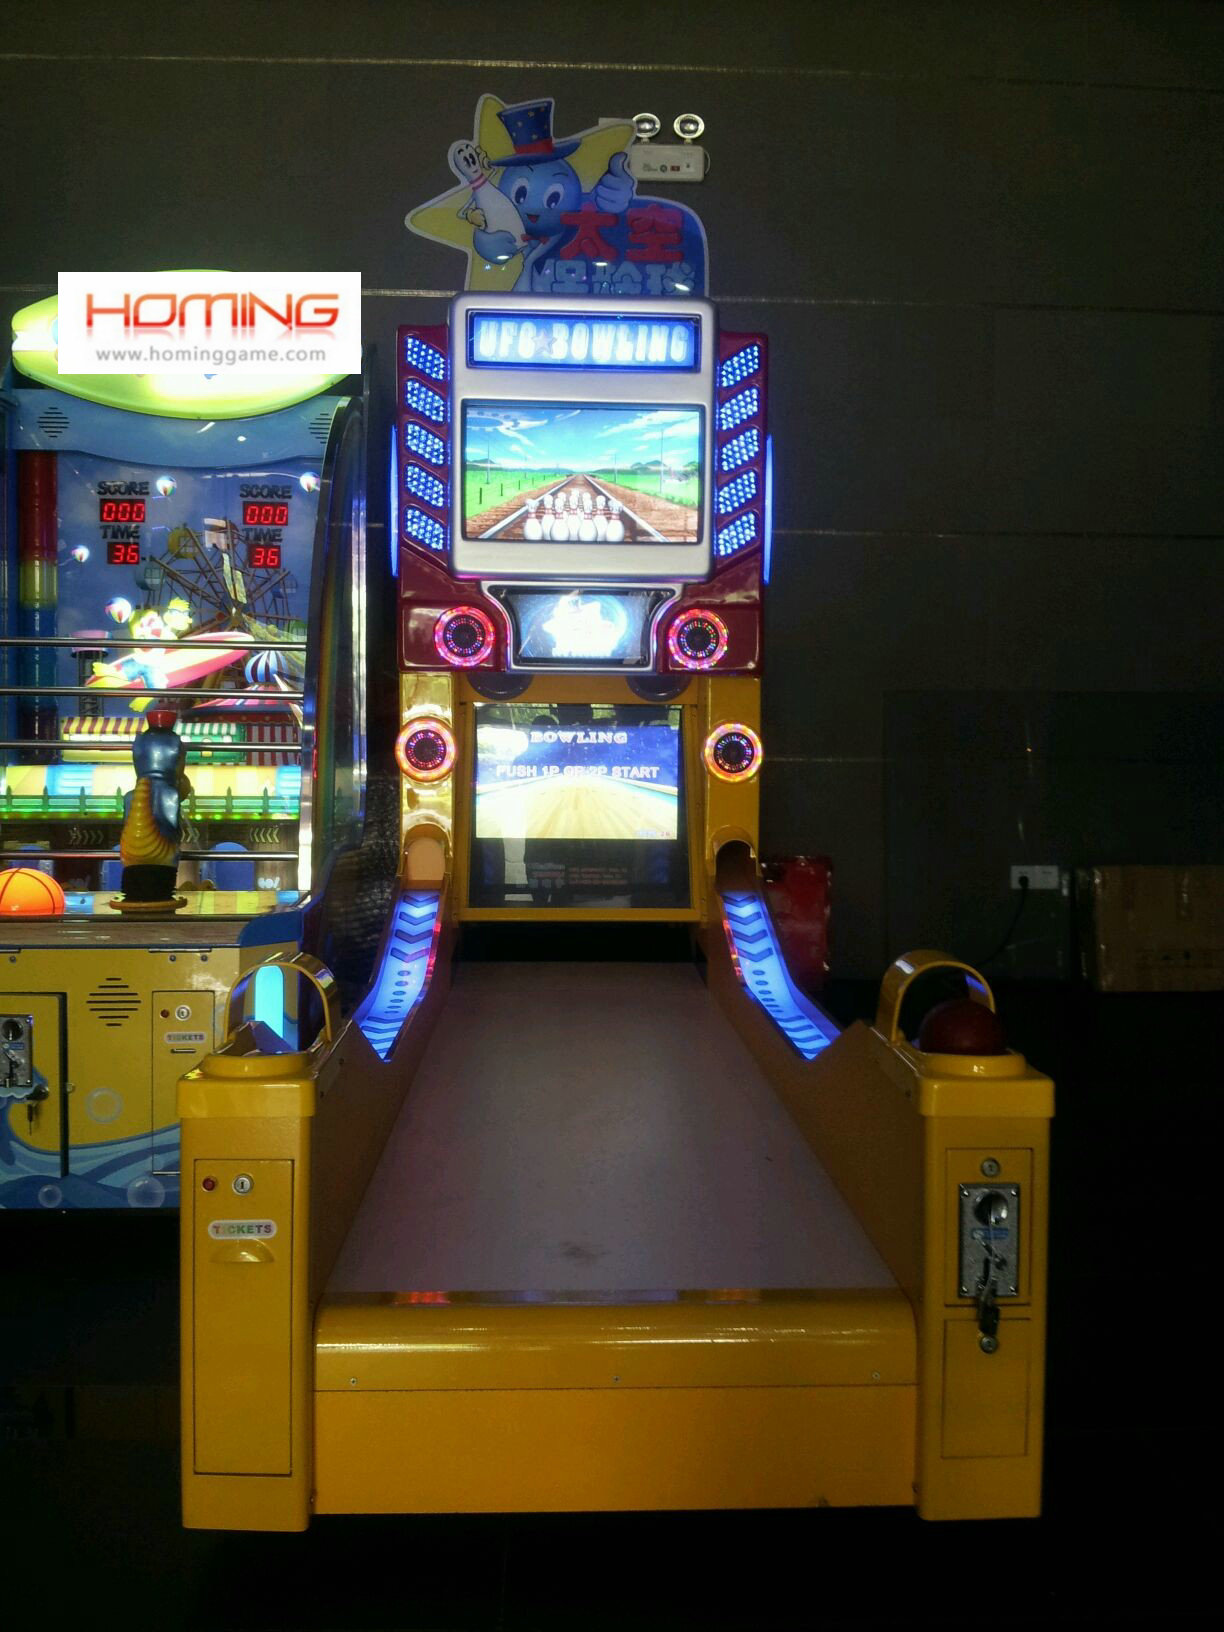 UFO Bowling redemption game machine,game machine,arcade game machine,game equipoment,arcade games,indoor game machine,redemption game machine,coin operated game machine,bowling game machine,blowing redemption game machine, bowling arcade video game machine,children bowling amusement equipment, fancy bowling mouse 